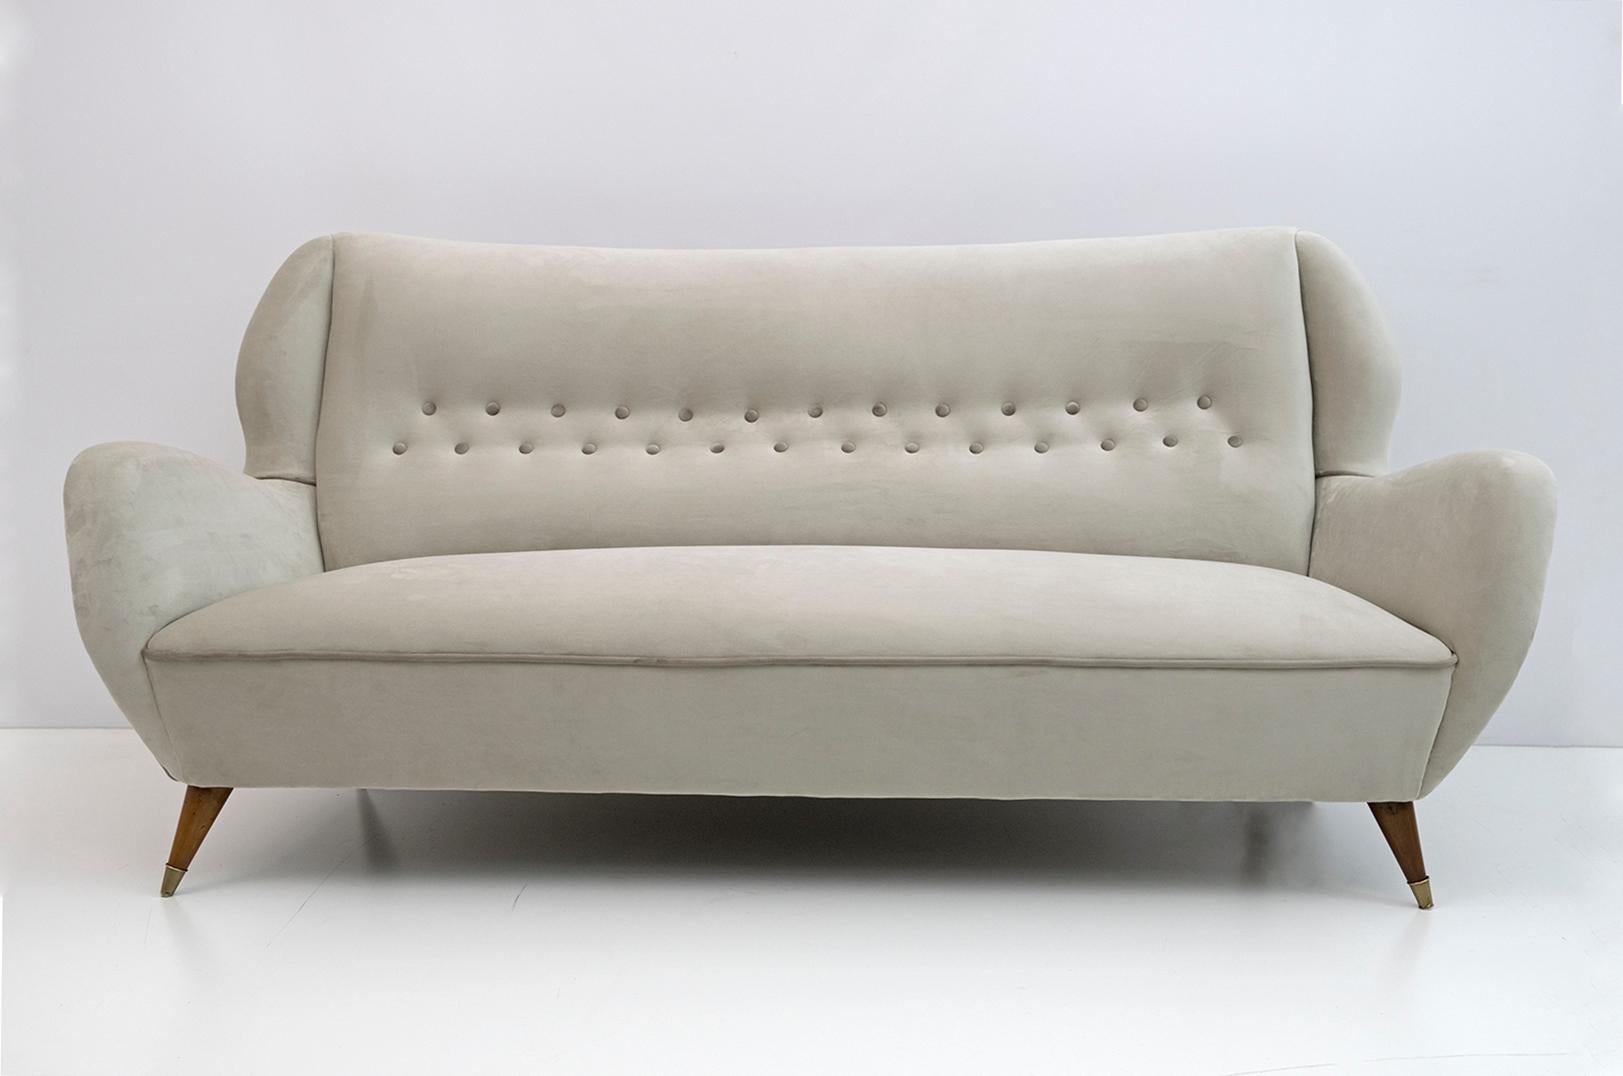 Elegant and splendid three-seater sofa with high backrest attributed Gio Ponti, 1950s, for ISA Edizioni, Bergamo. Carved profile, refined lines, sensual and deep comfort. The ivory velvet upholstery has been redone.